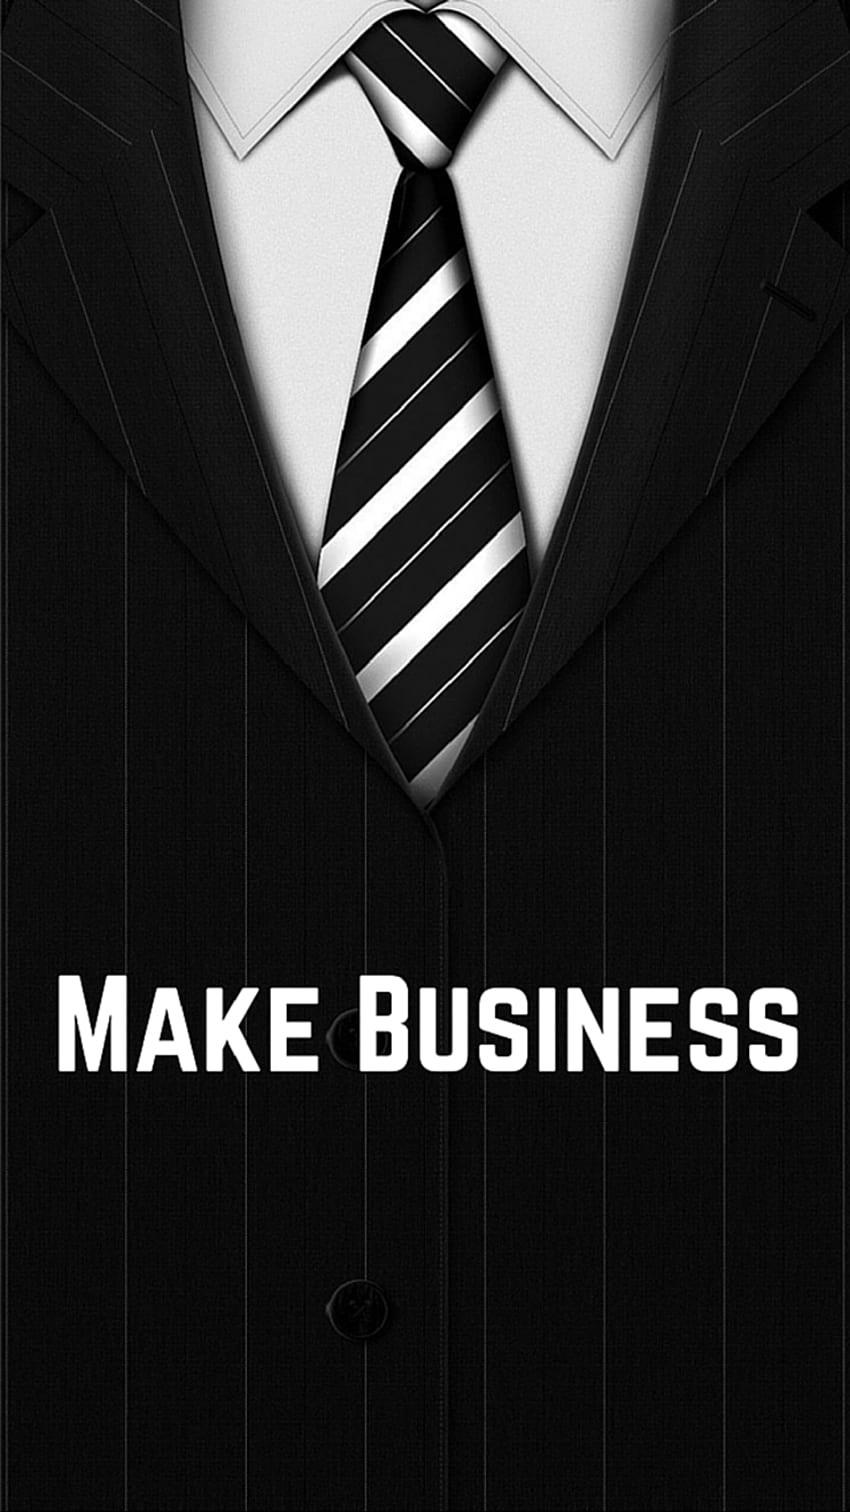 Ƒ↑TAP AND GET THE APP! Art Creative Quote Business Tie Suit HD phone wallpaper